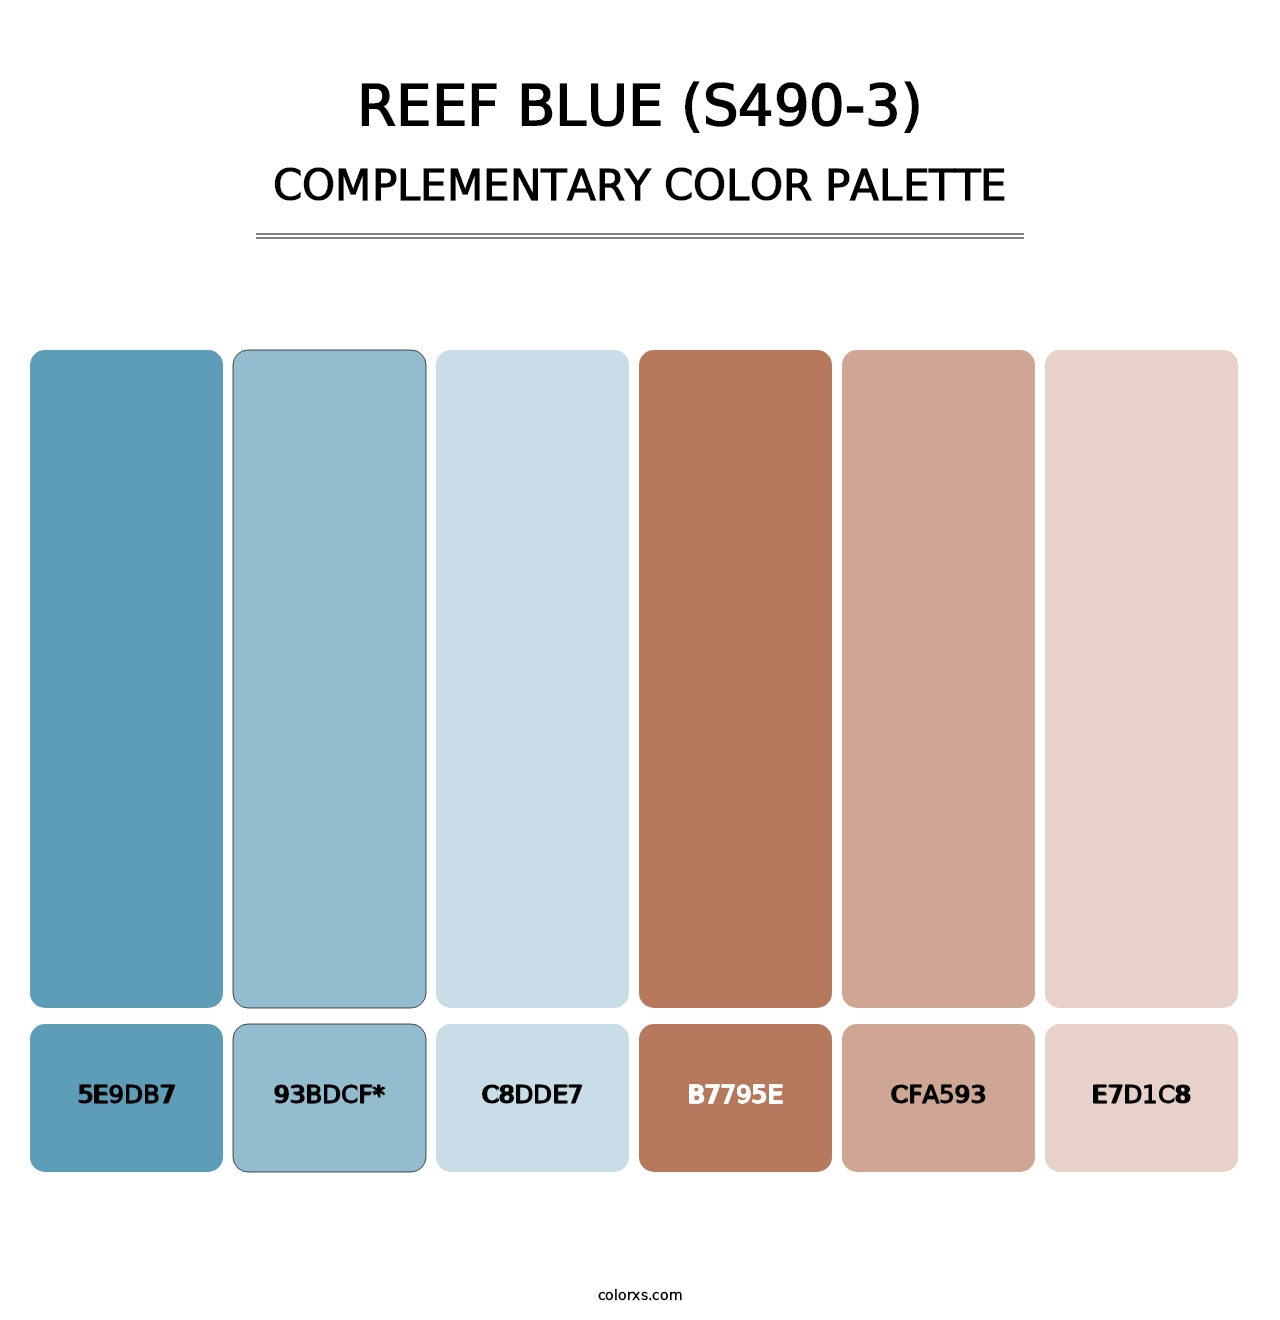 Reef Blue (S490-3) - Complementary Color Palette